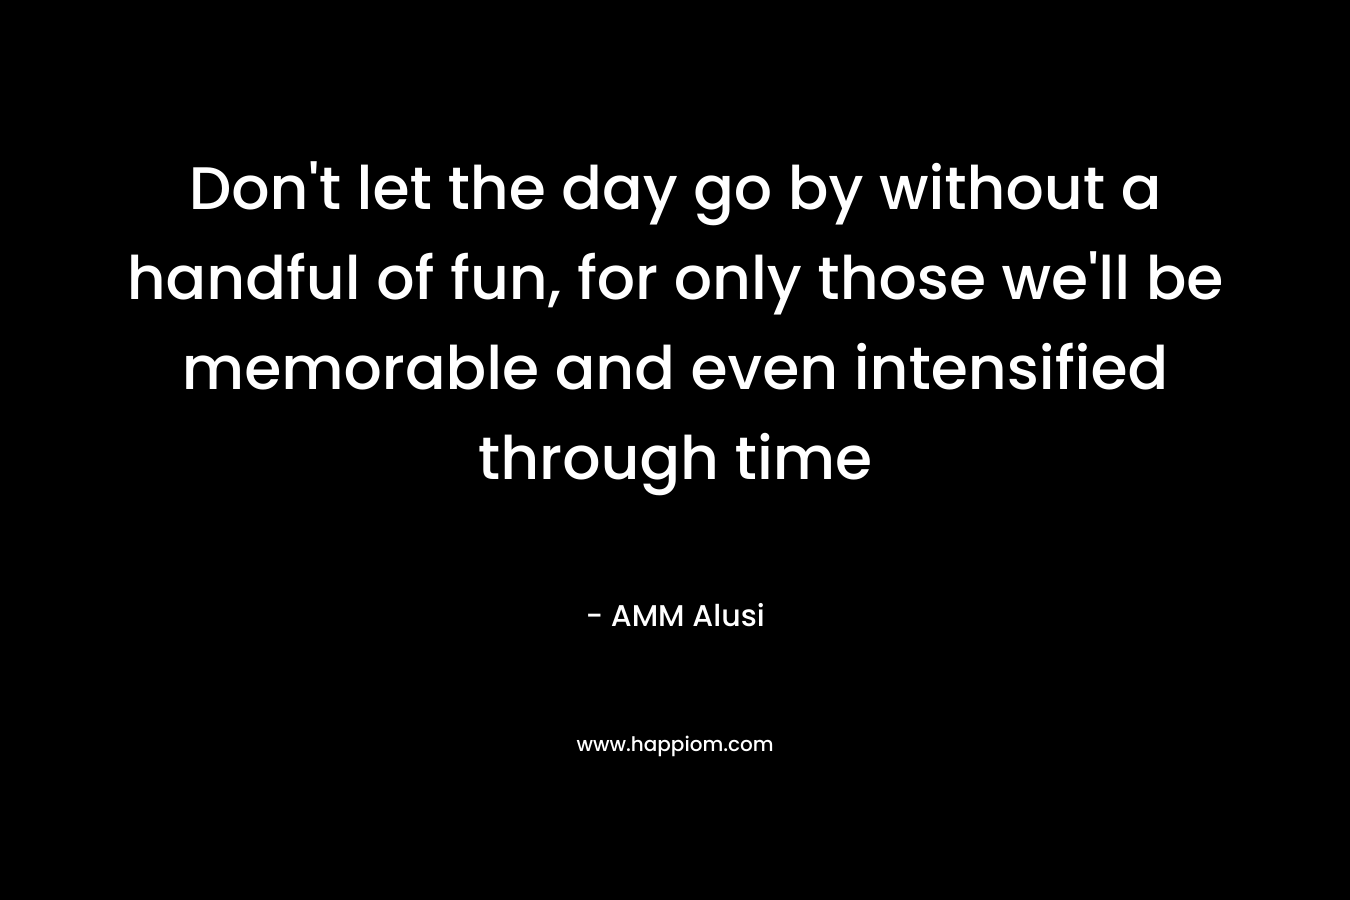 Don’t let the day go by without a handful of fun, for only those we’ll be memorable and even intensified through time – AMM Alusi